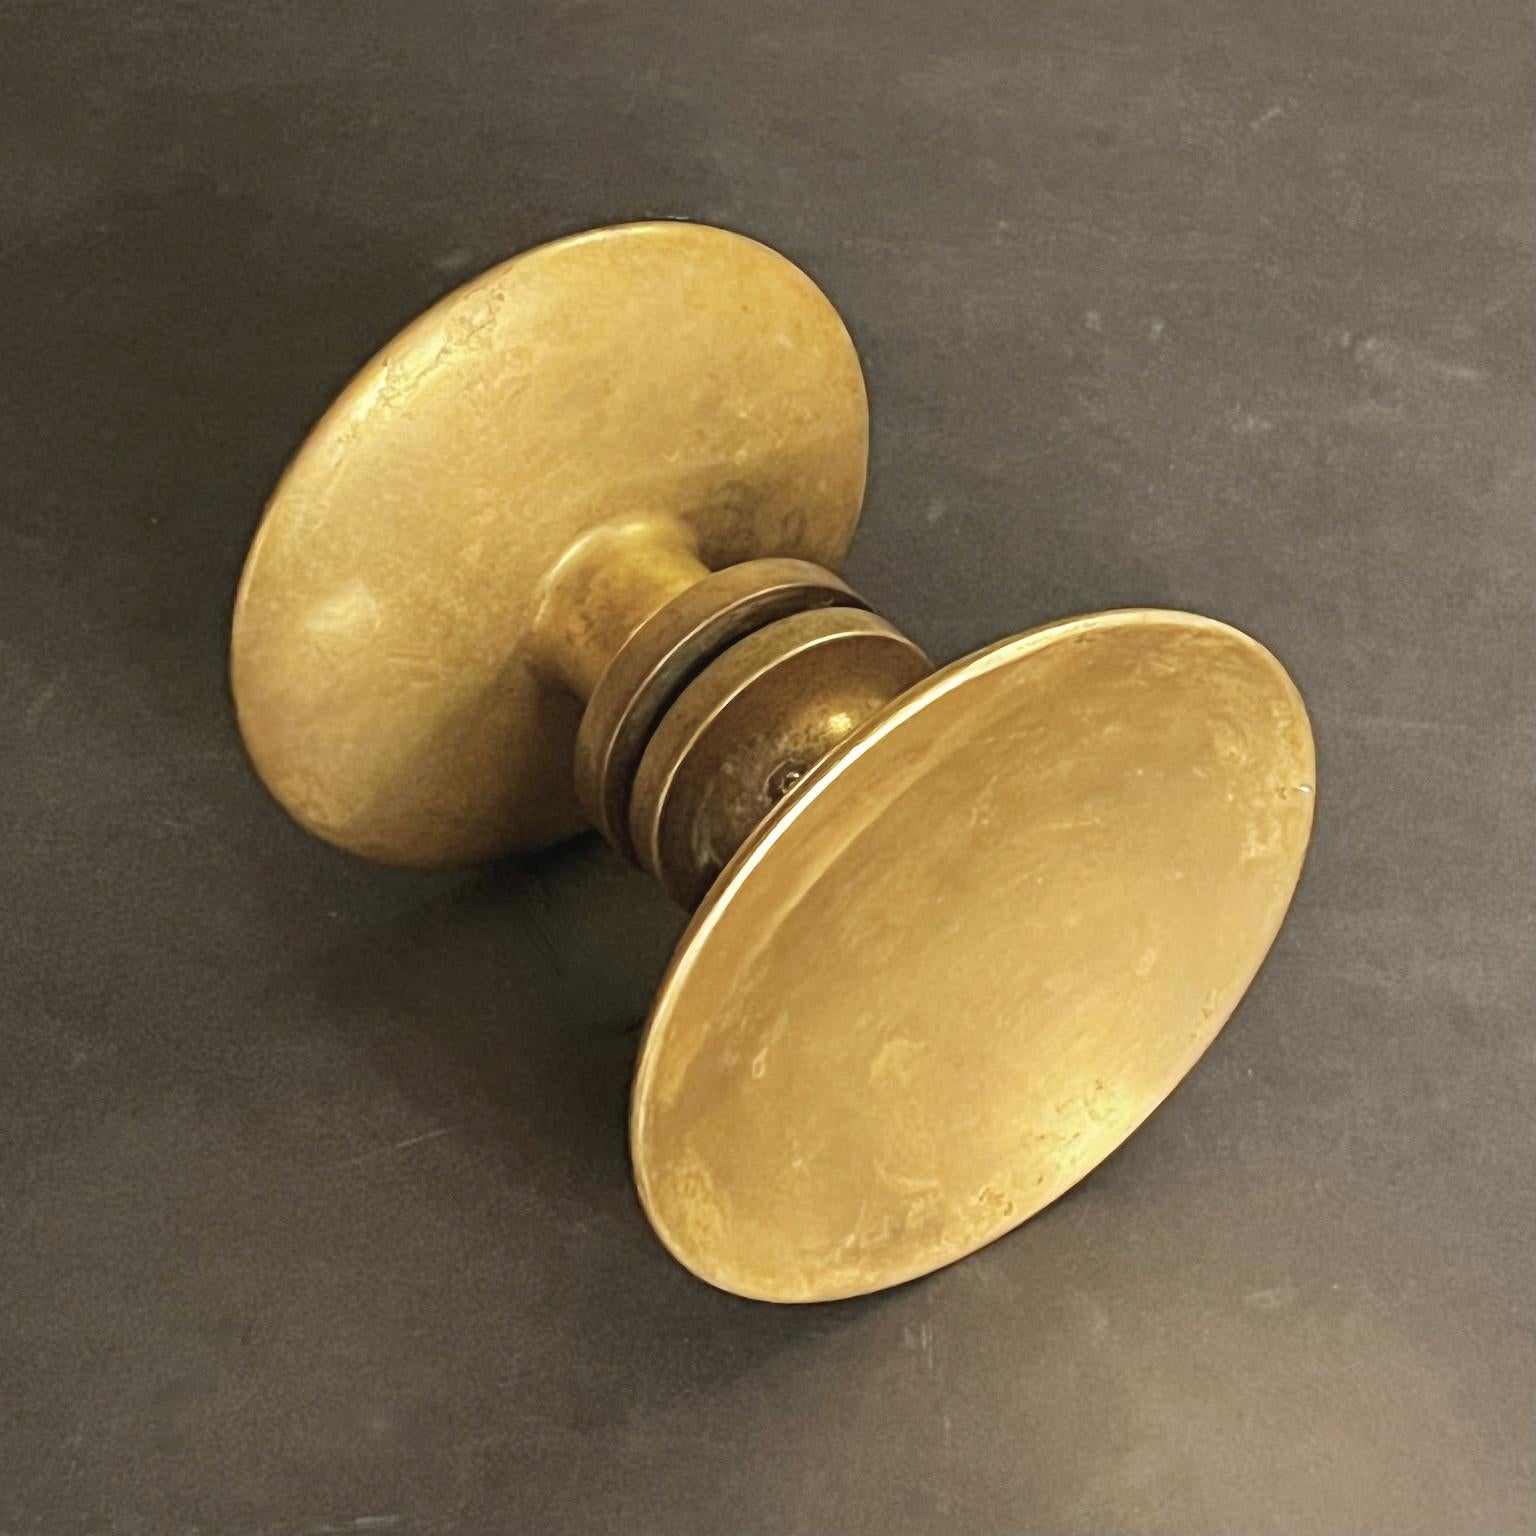 ON HOLD

Circular push-pull door handle in bronze, mid-20th century, France.

A simple elegant handle, made up of two separate round pieces; each side with a slightly concave dish and wide stem. The components are in good vintage condition with lots